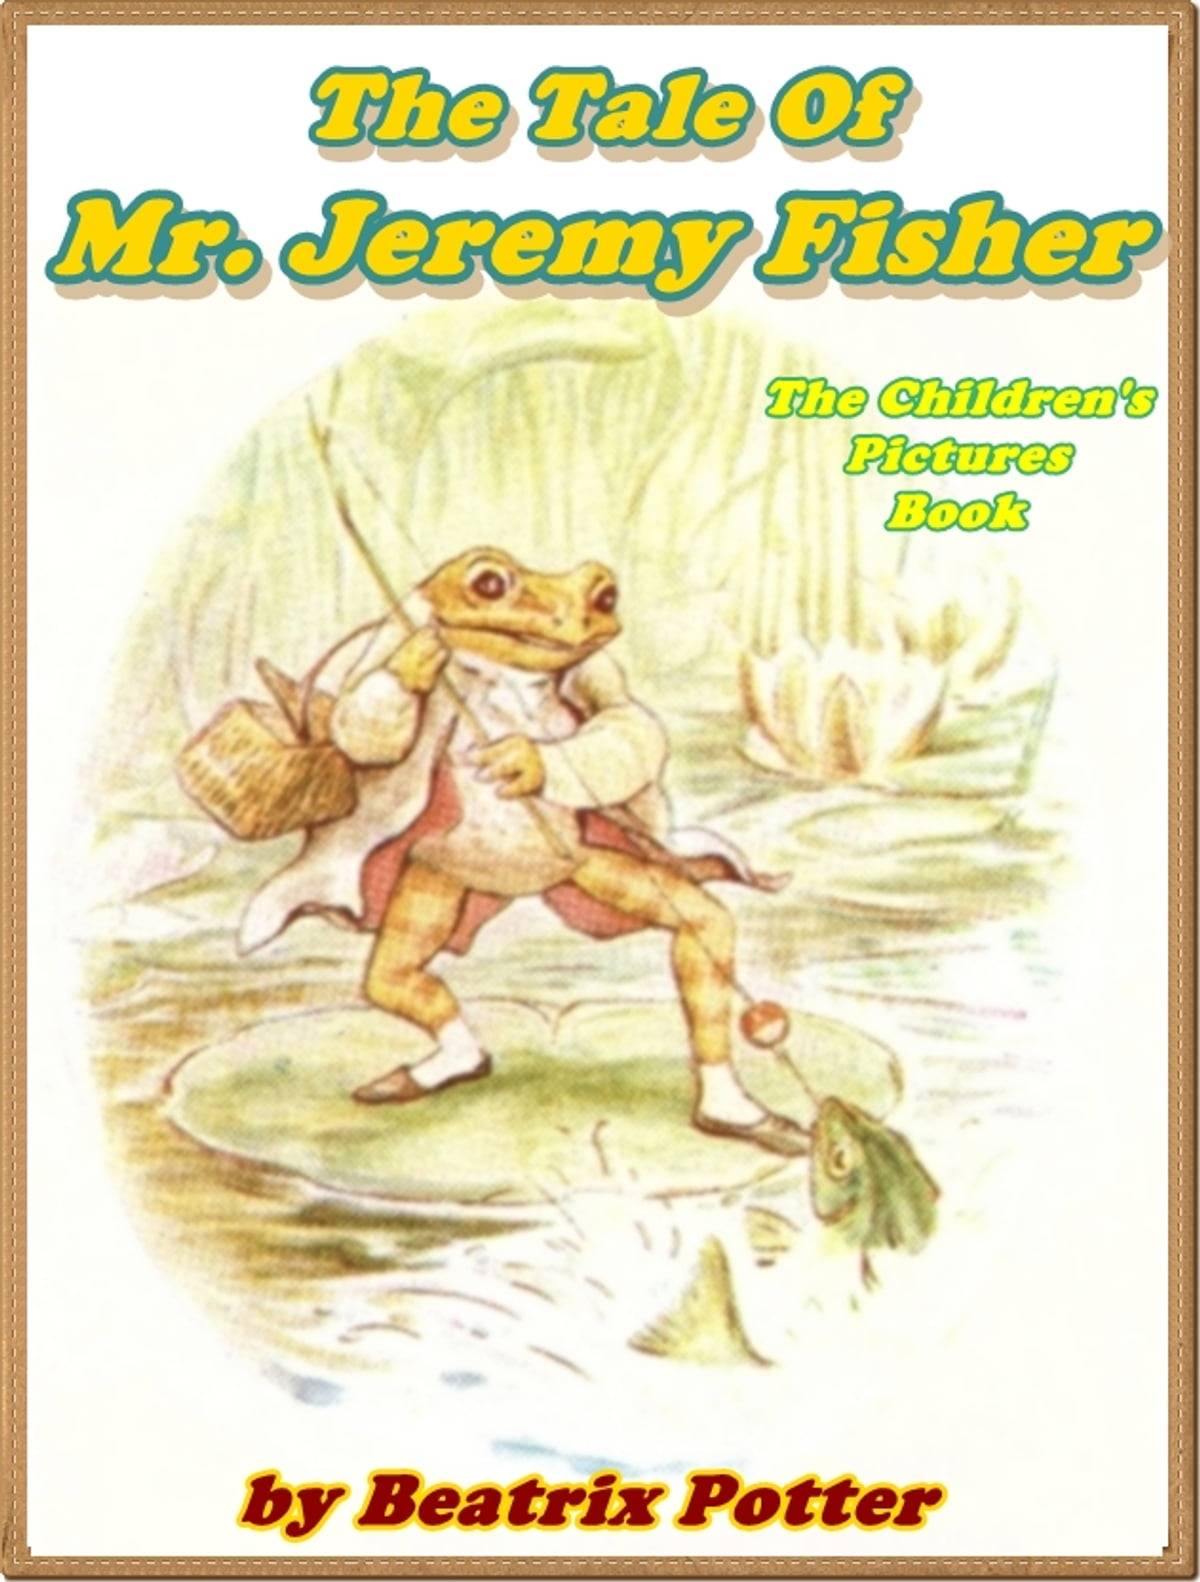 IMG : The Tale of Mr. Jeremy Fisher